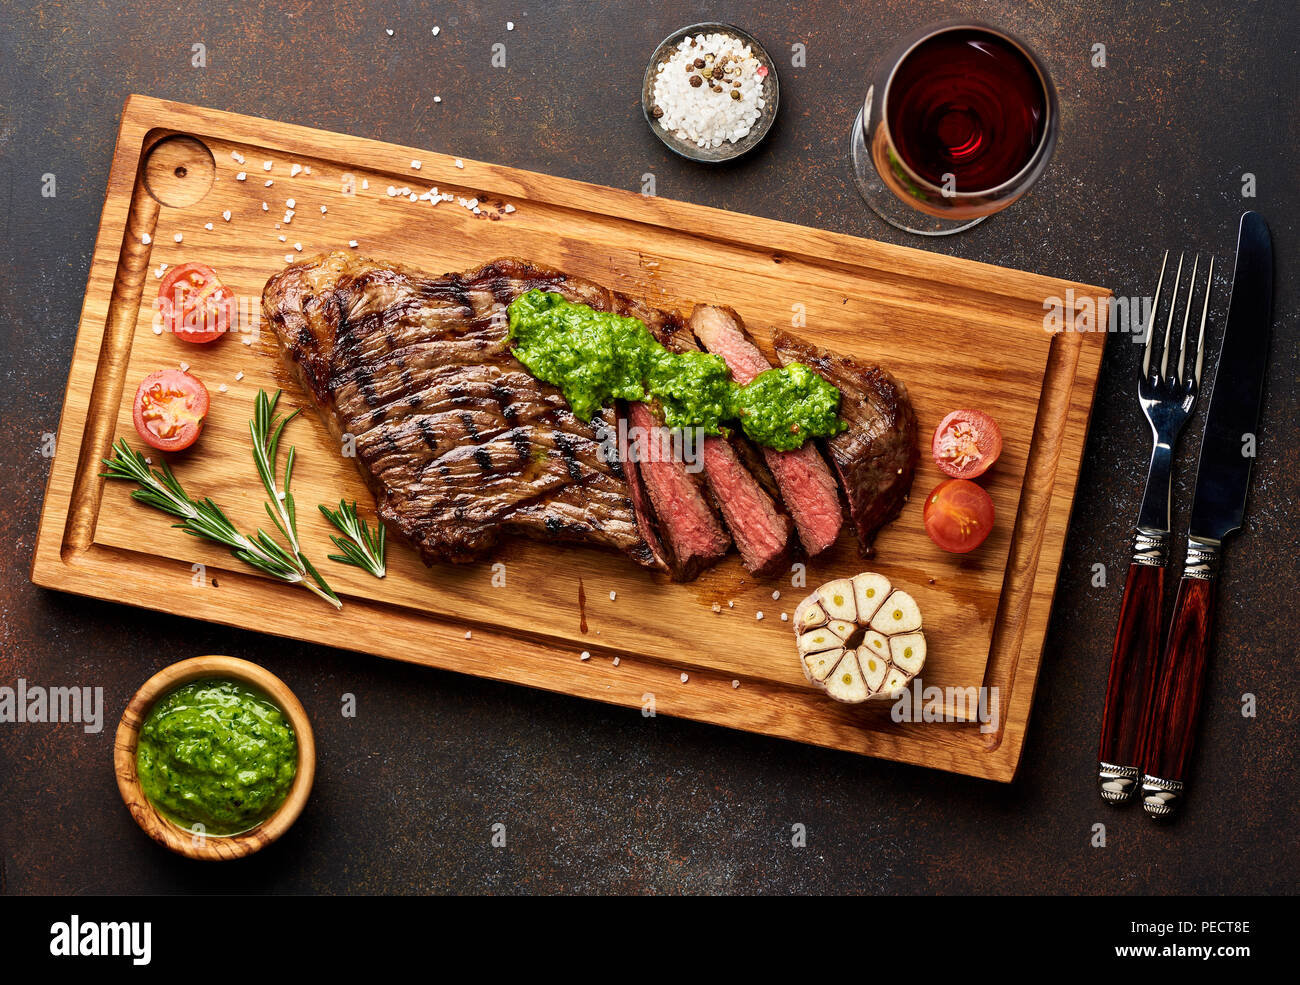 Grilled Black Angus Steak and a glass of red wine with chimichurri sauce on meat cutting board. Stock Photo